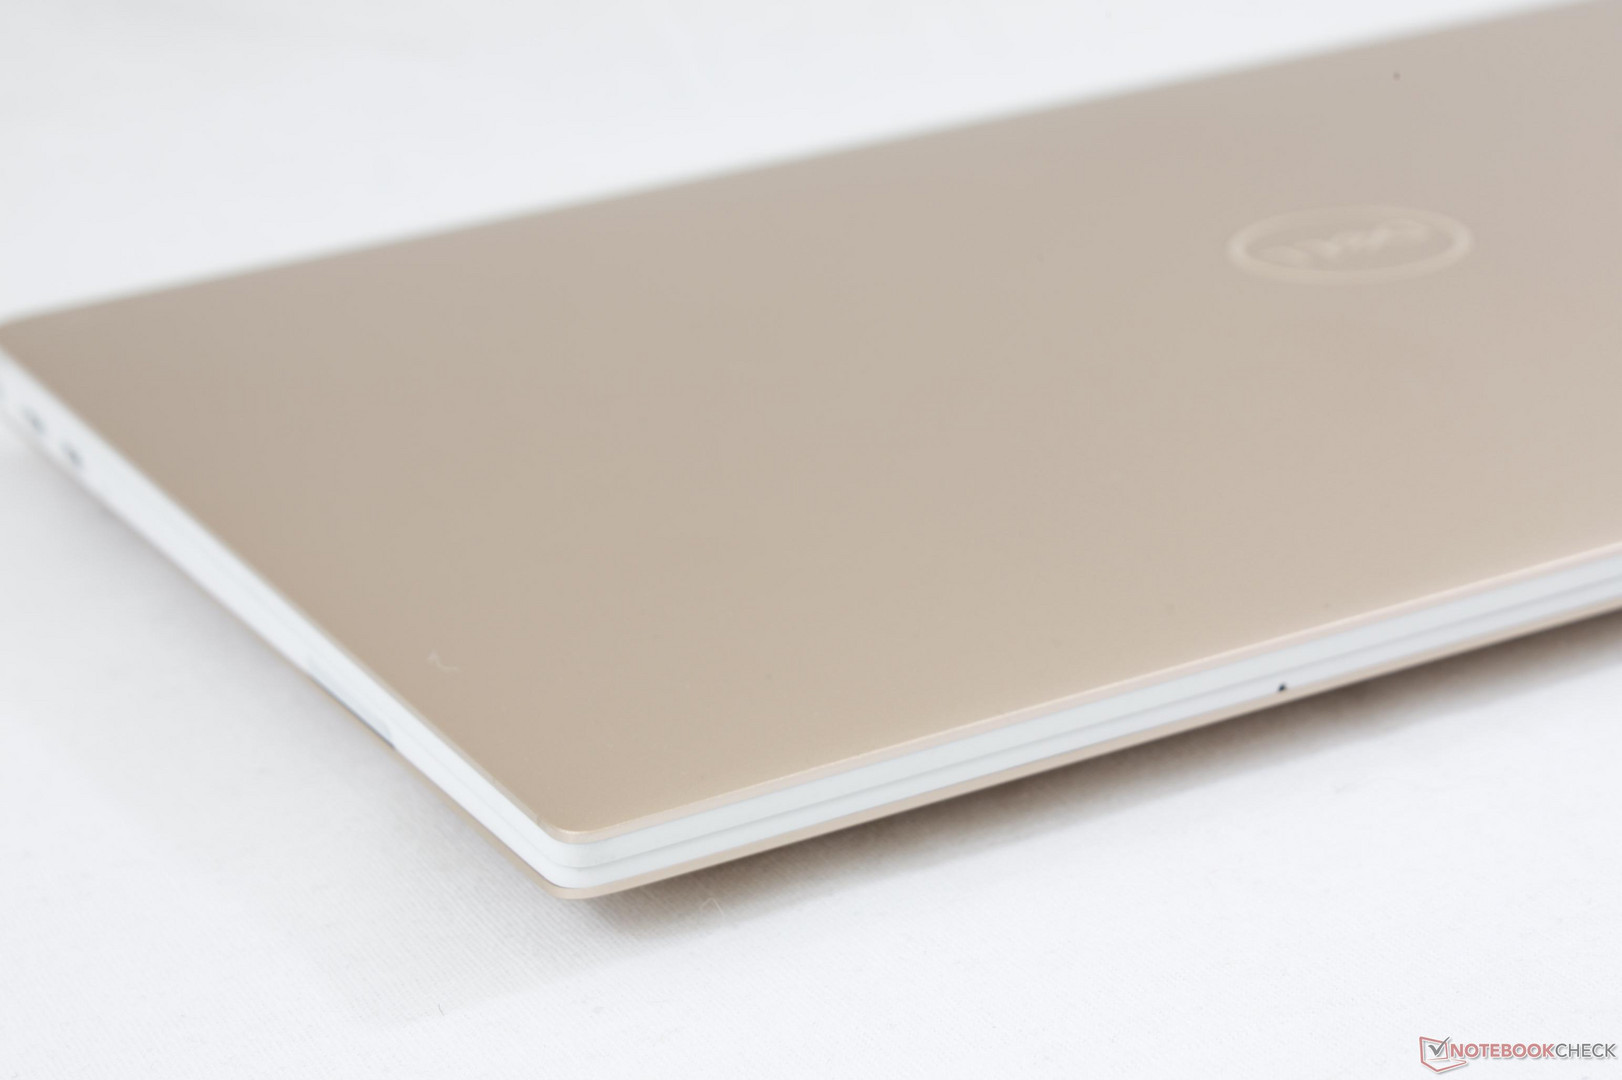 dell xps 13 9370